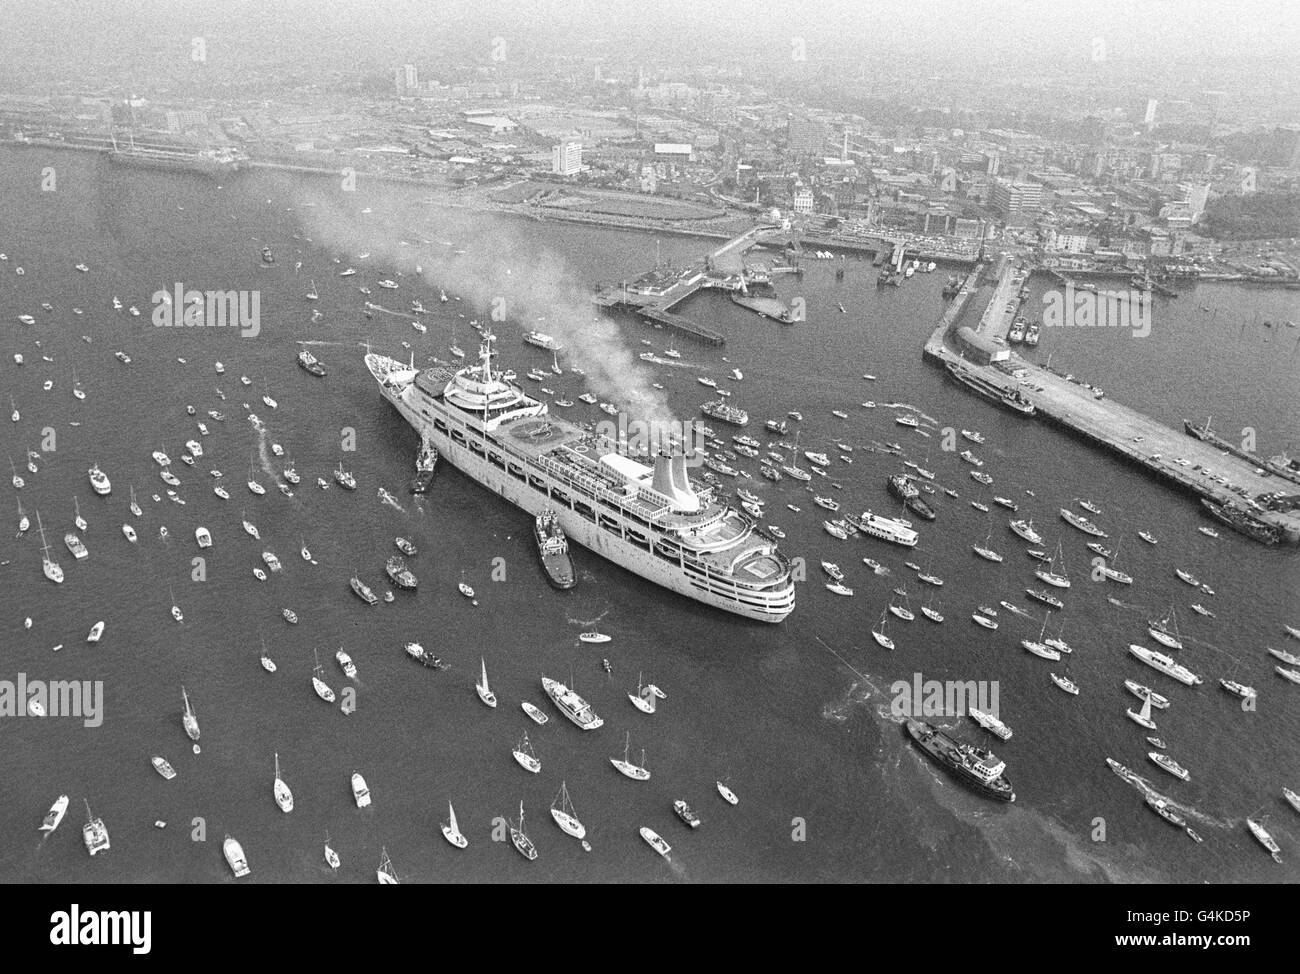 Aerial view of the Canberra, luxury liner turned troop carrier, as she came home to Southampton from the Falkland Islands conflict, escorted by hundreds of boats, yachts, tugs and dinghies, who greeted her between the Isle of Wight and Southampton. Stock Photo